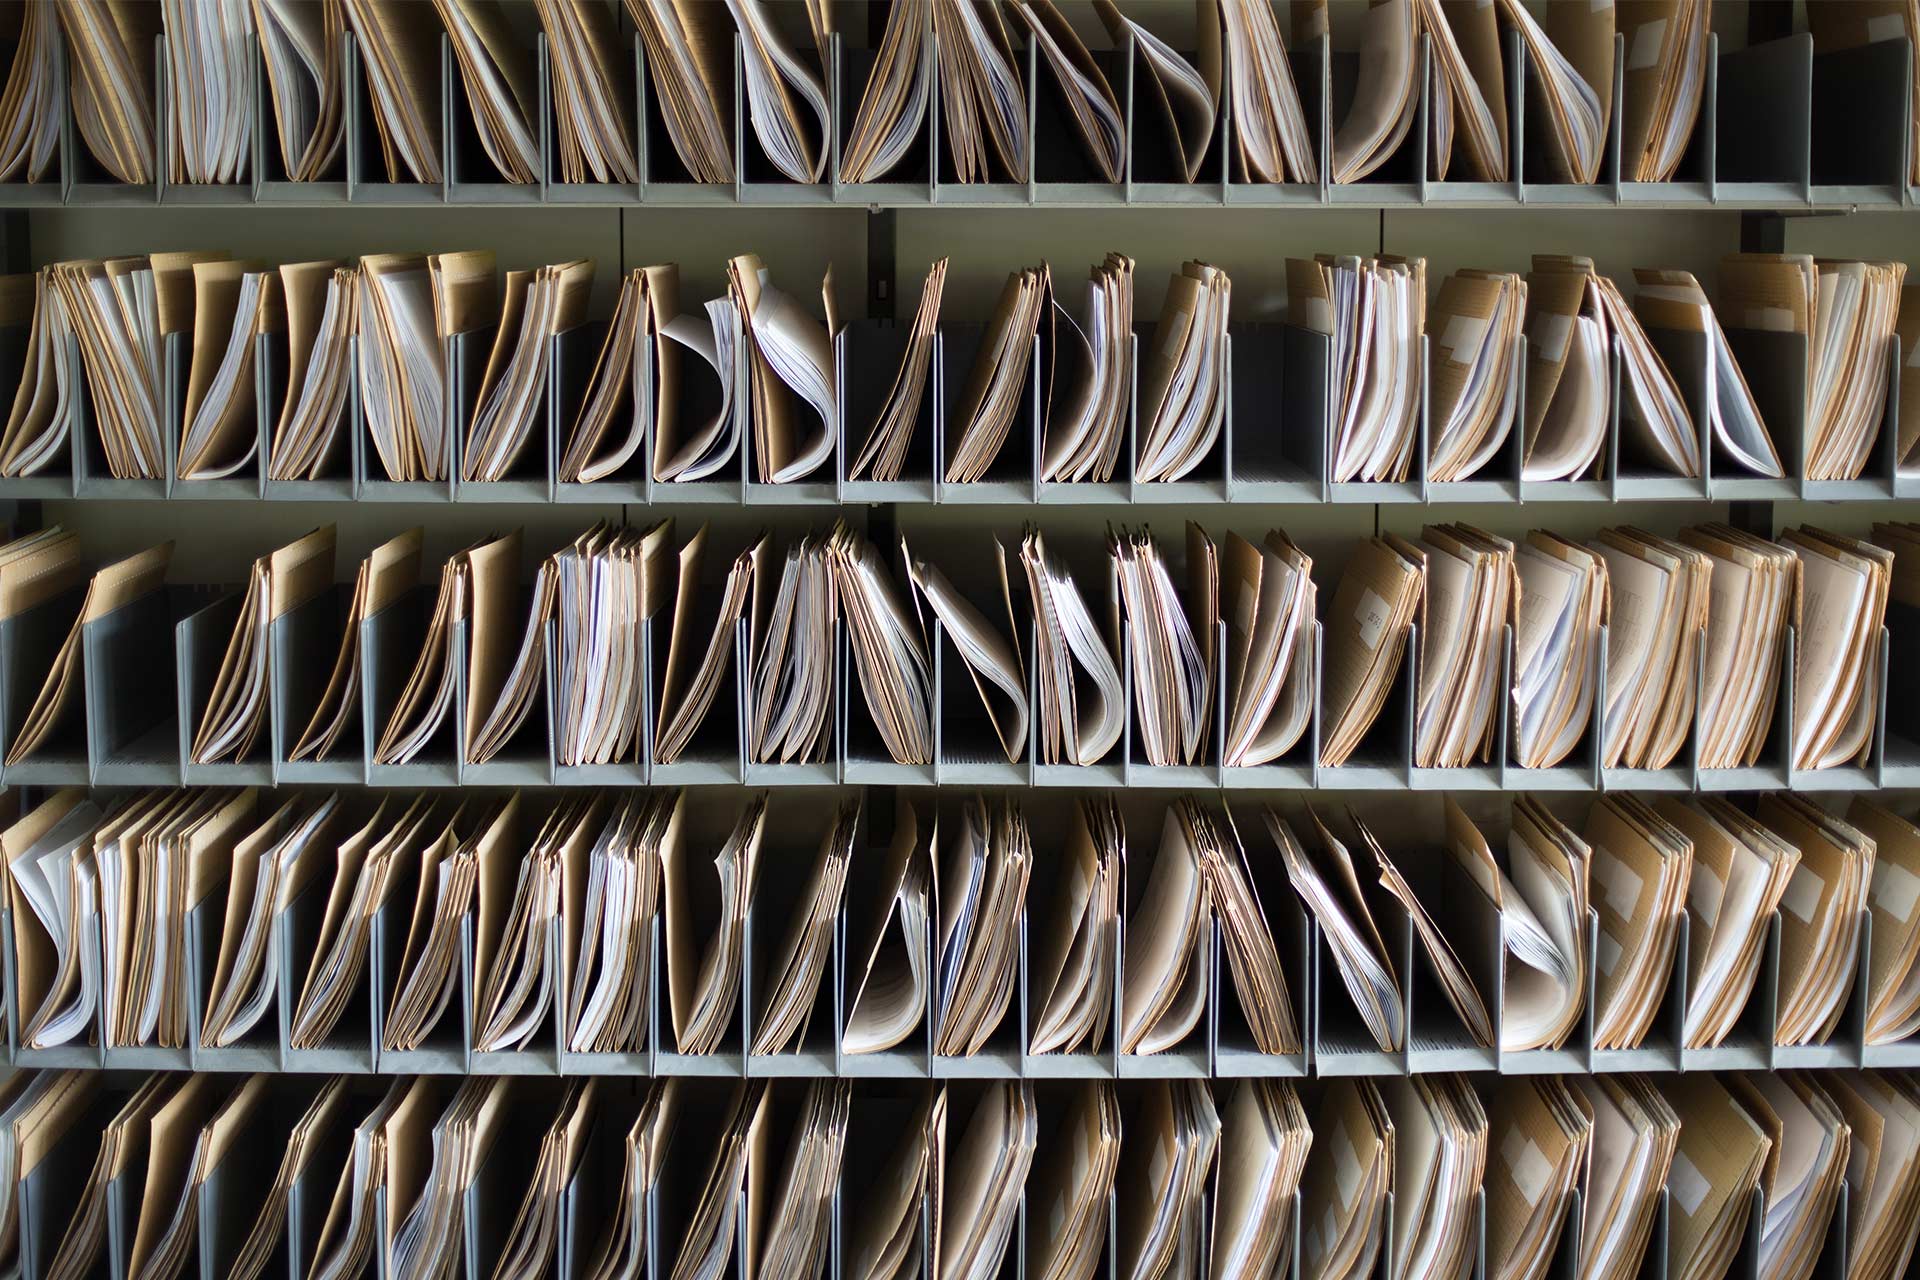 Paper files stored as records, representing the process of computer backup as a form of archiving